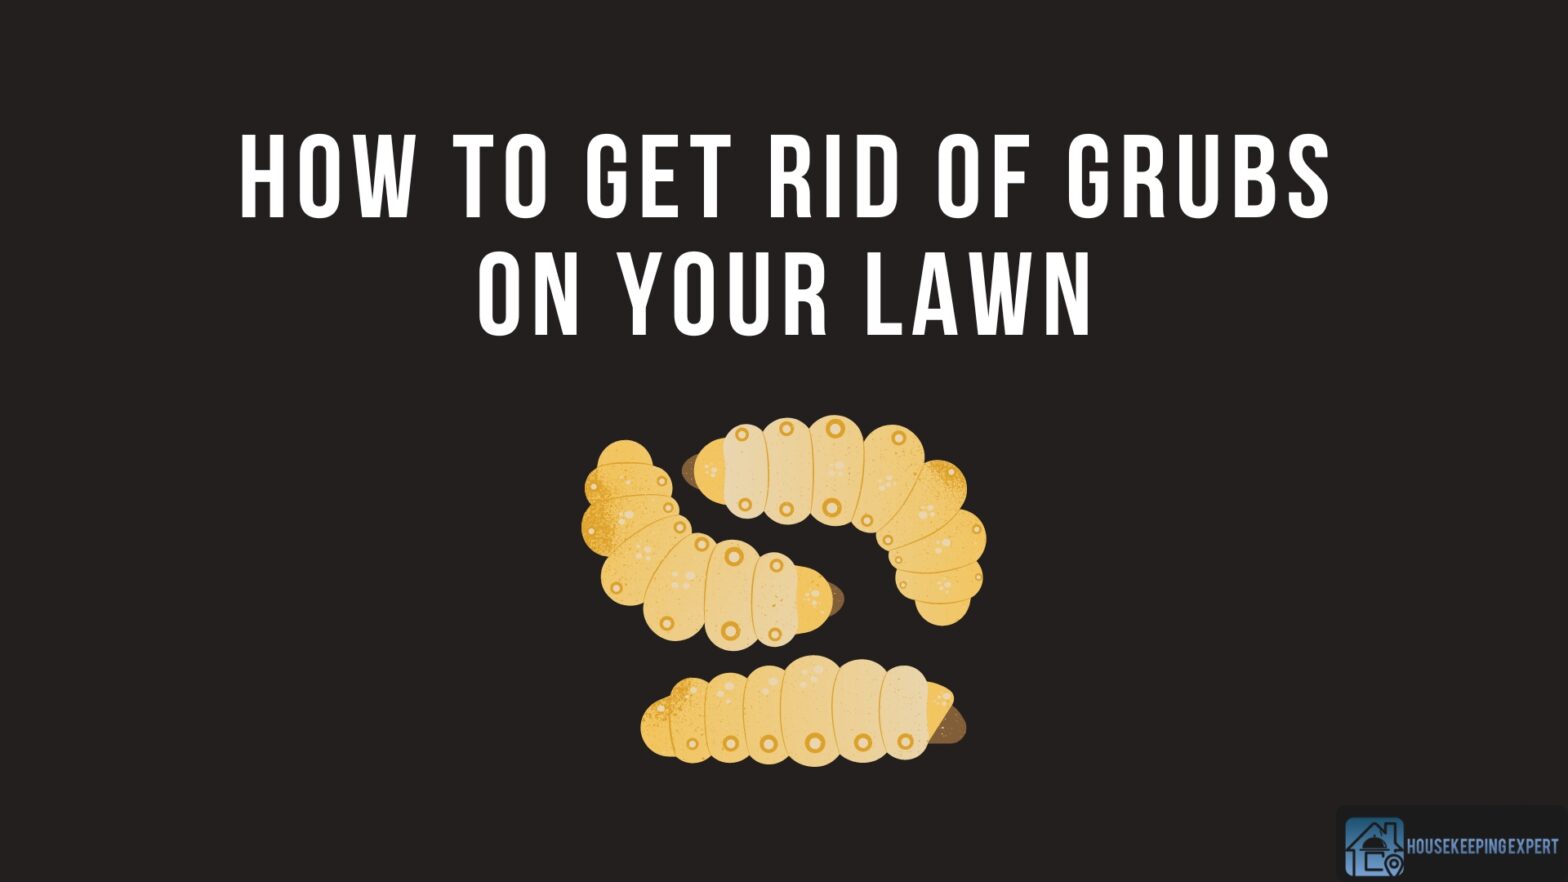 How To Get Rid Of Grubs On Your Lawn